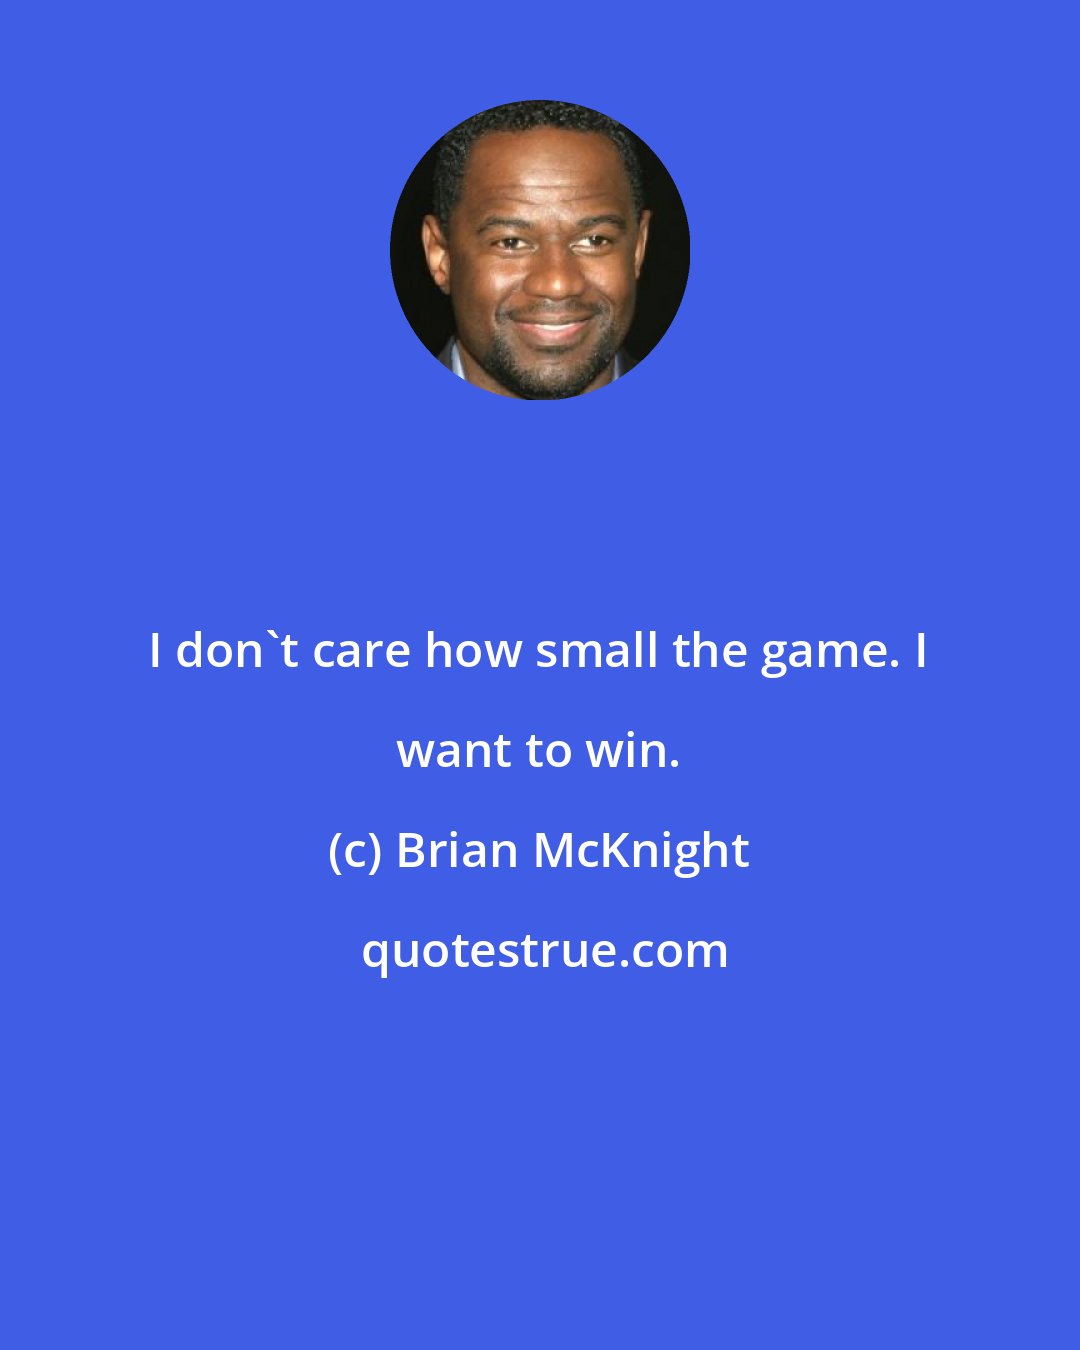 Brian McKnight: I don't care how small the game. I want to win.